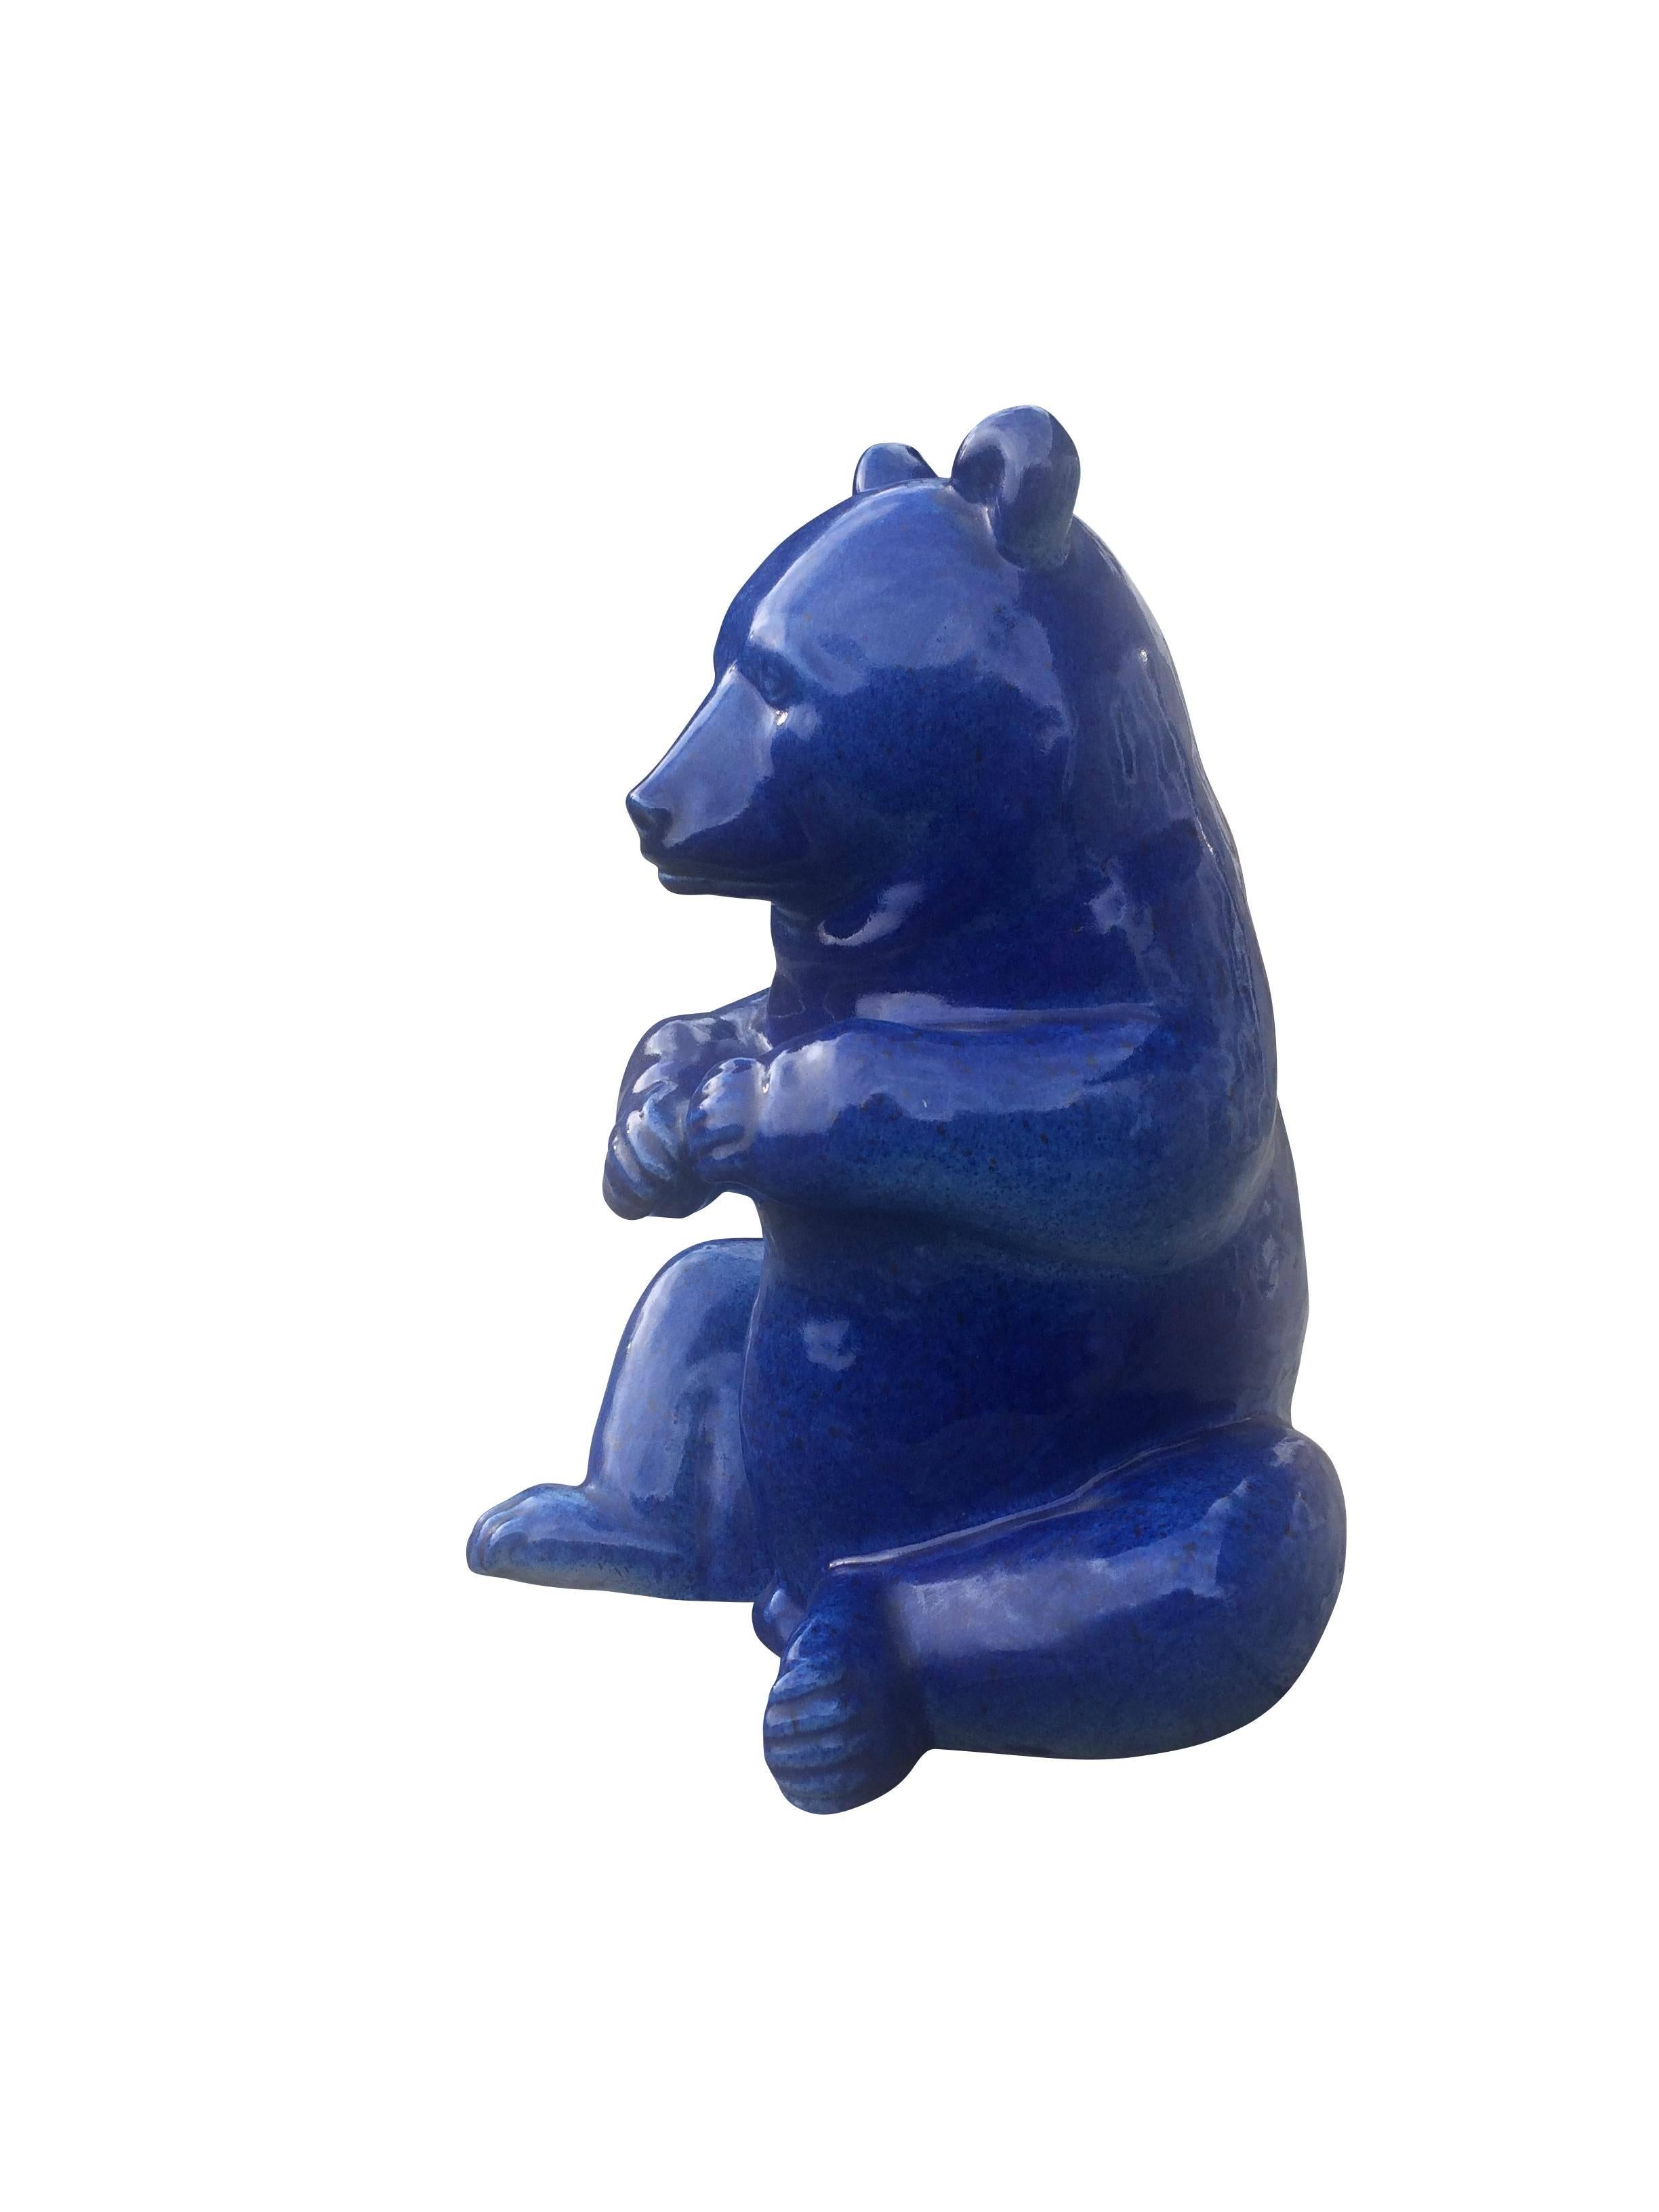 Michael Powolny, ceramic bear designed 1935.
Manufactured by Schleiss Company, Gmunden

Literature: E. Frottier, Michael Powolny, WV 535.